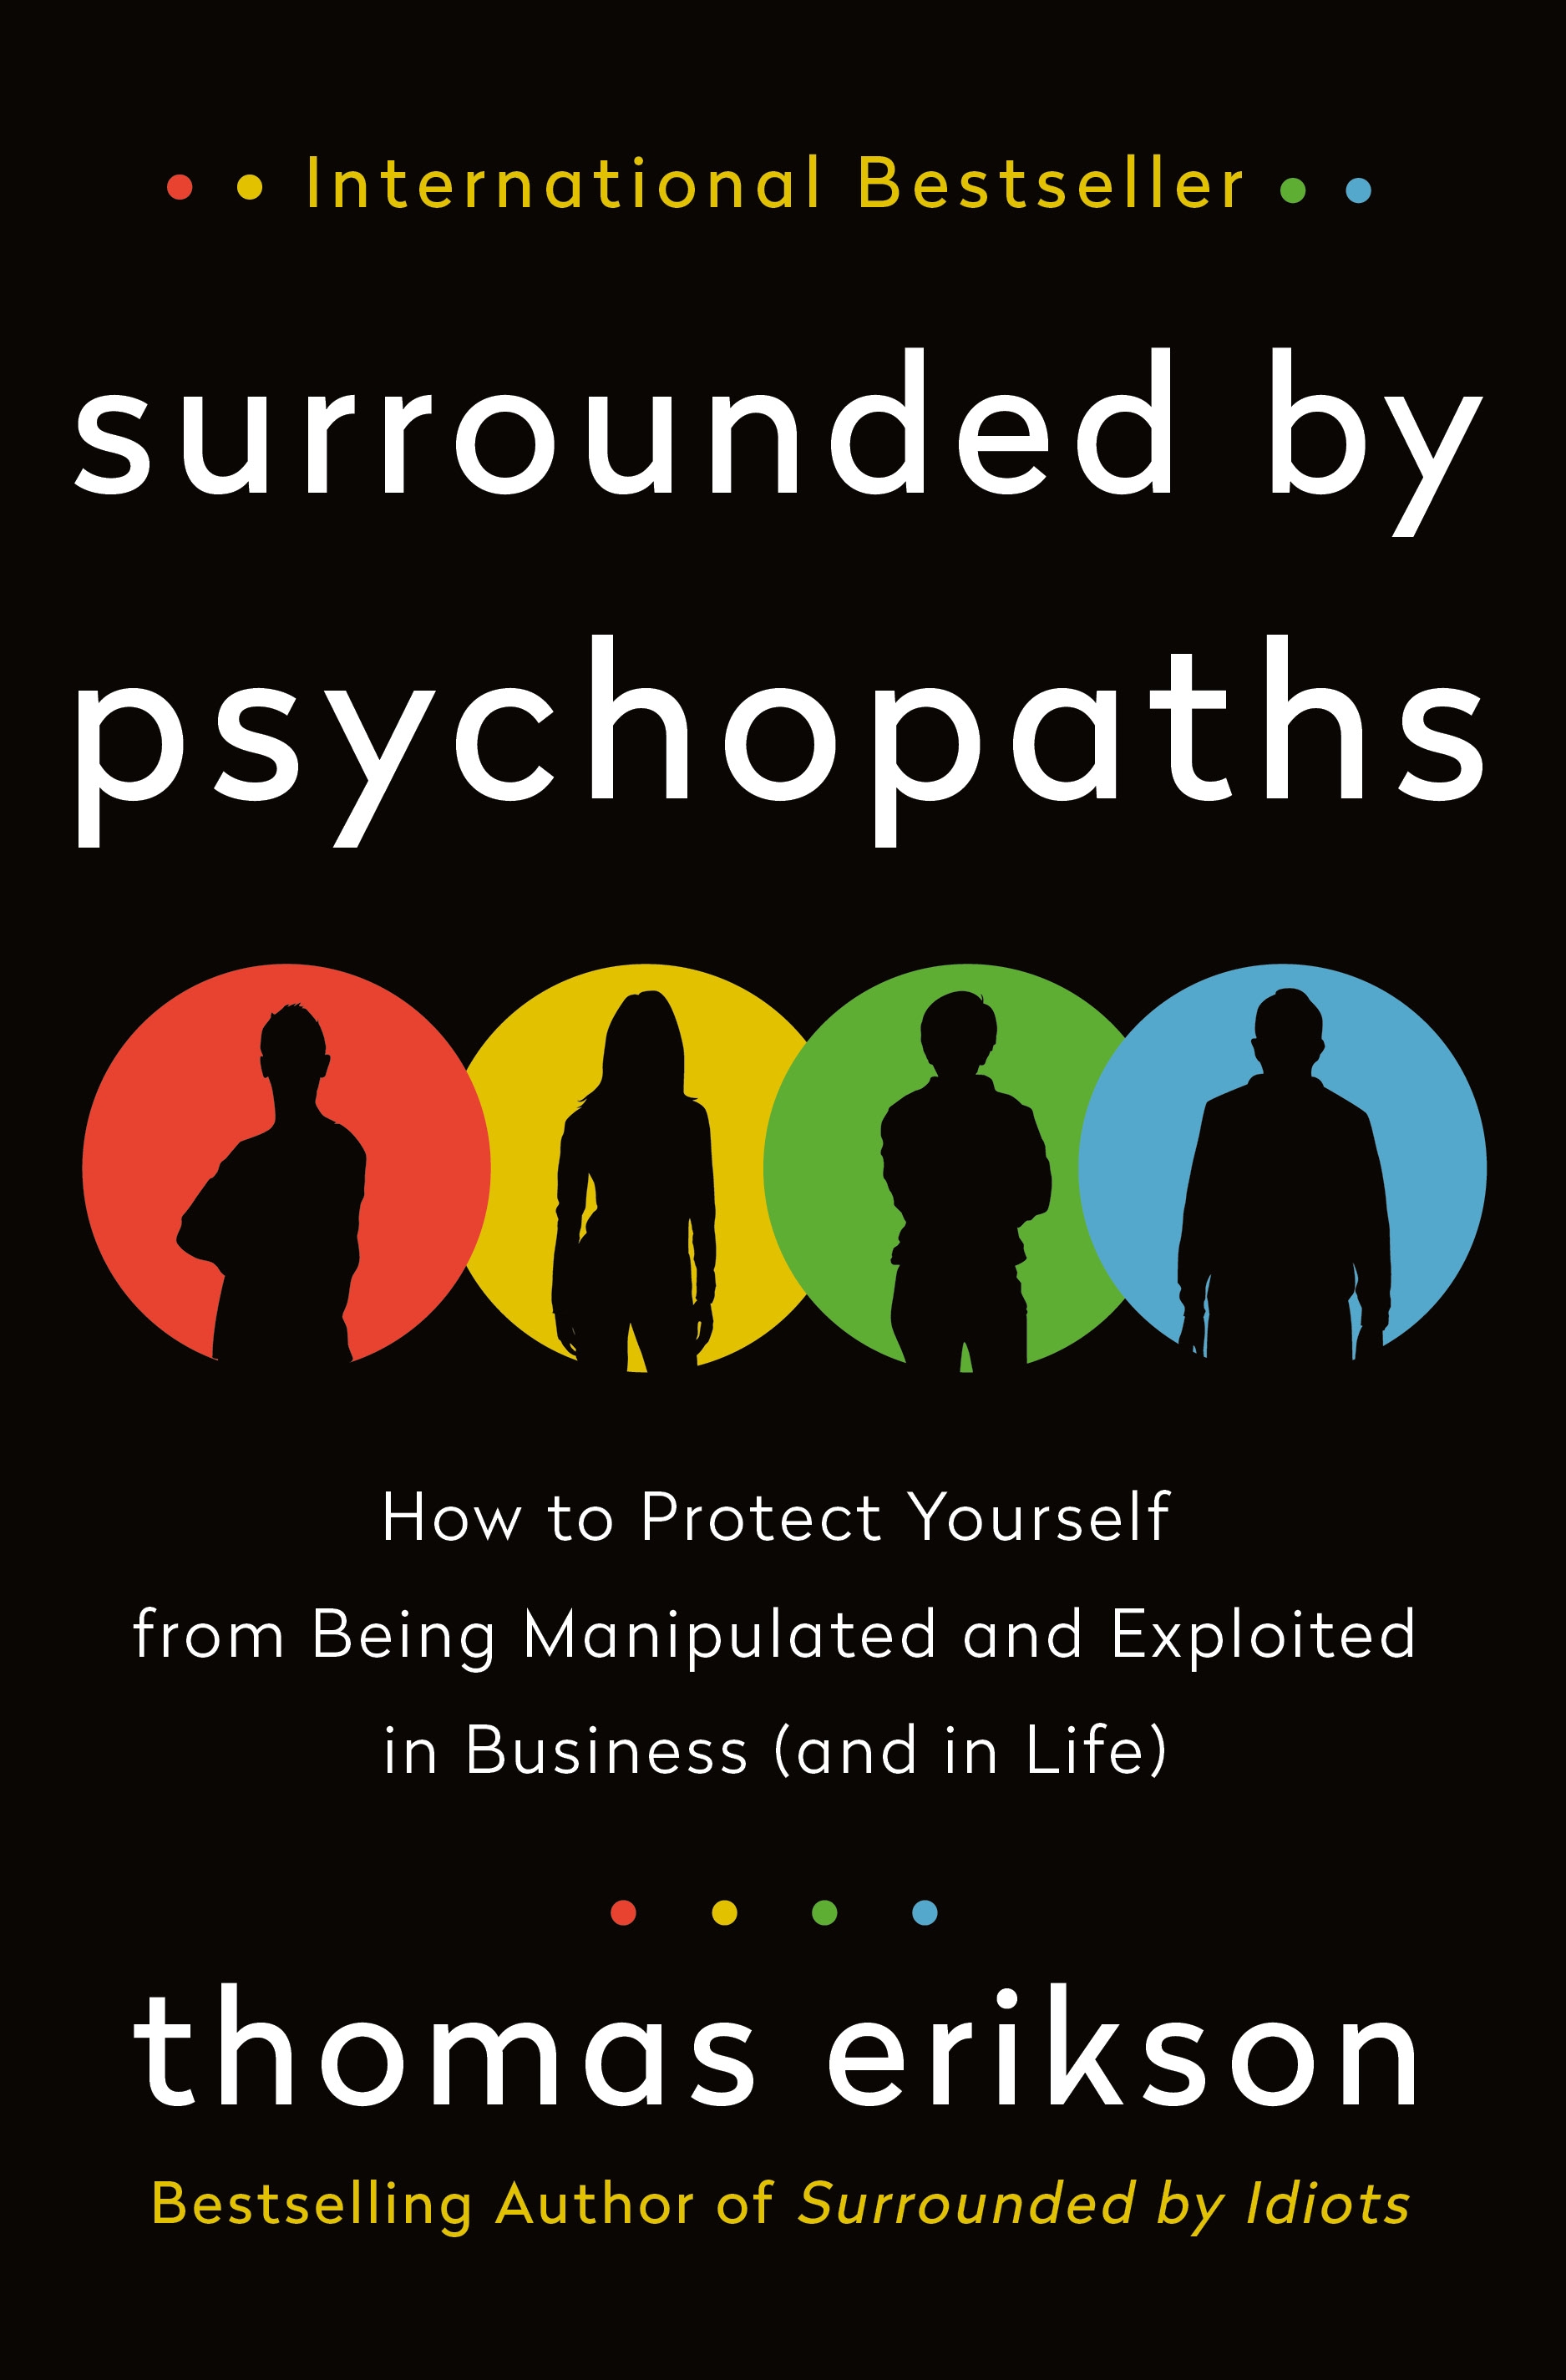 Book “Surrounded by Psychopaths” by Thomas Erikson — October 6, 2020